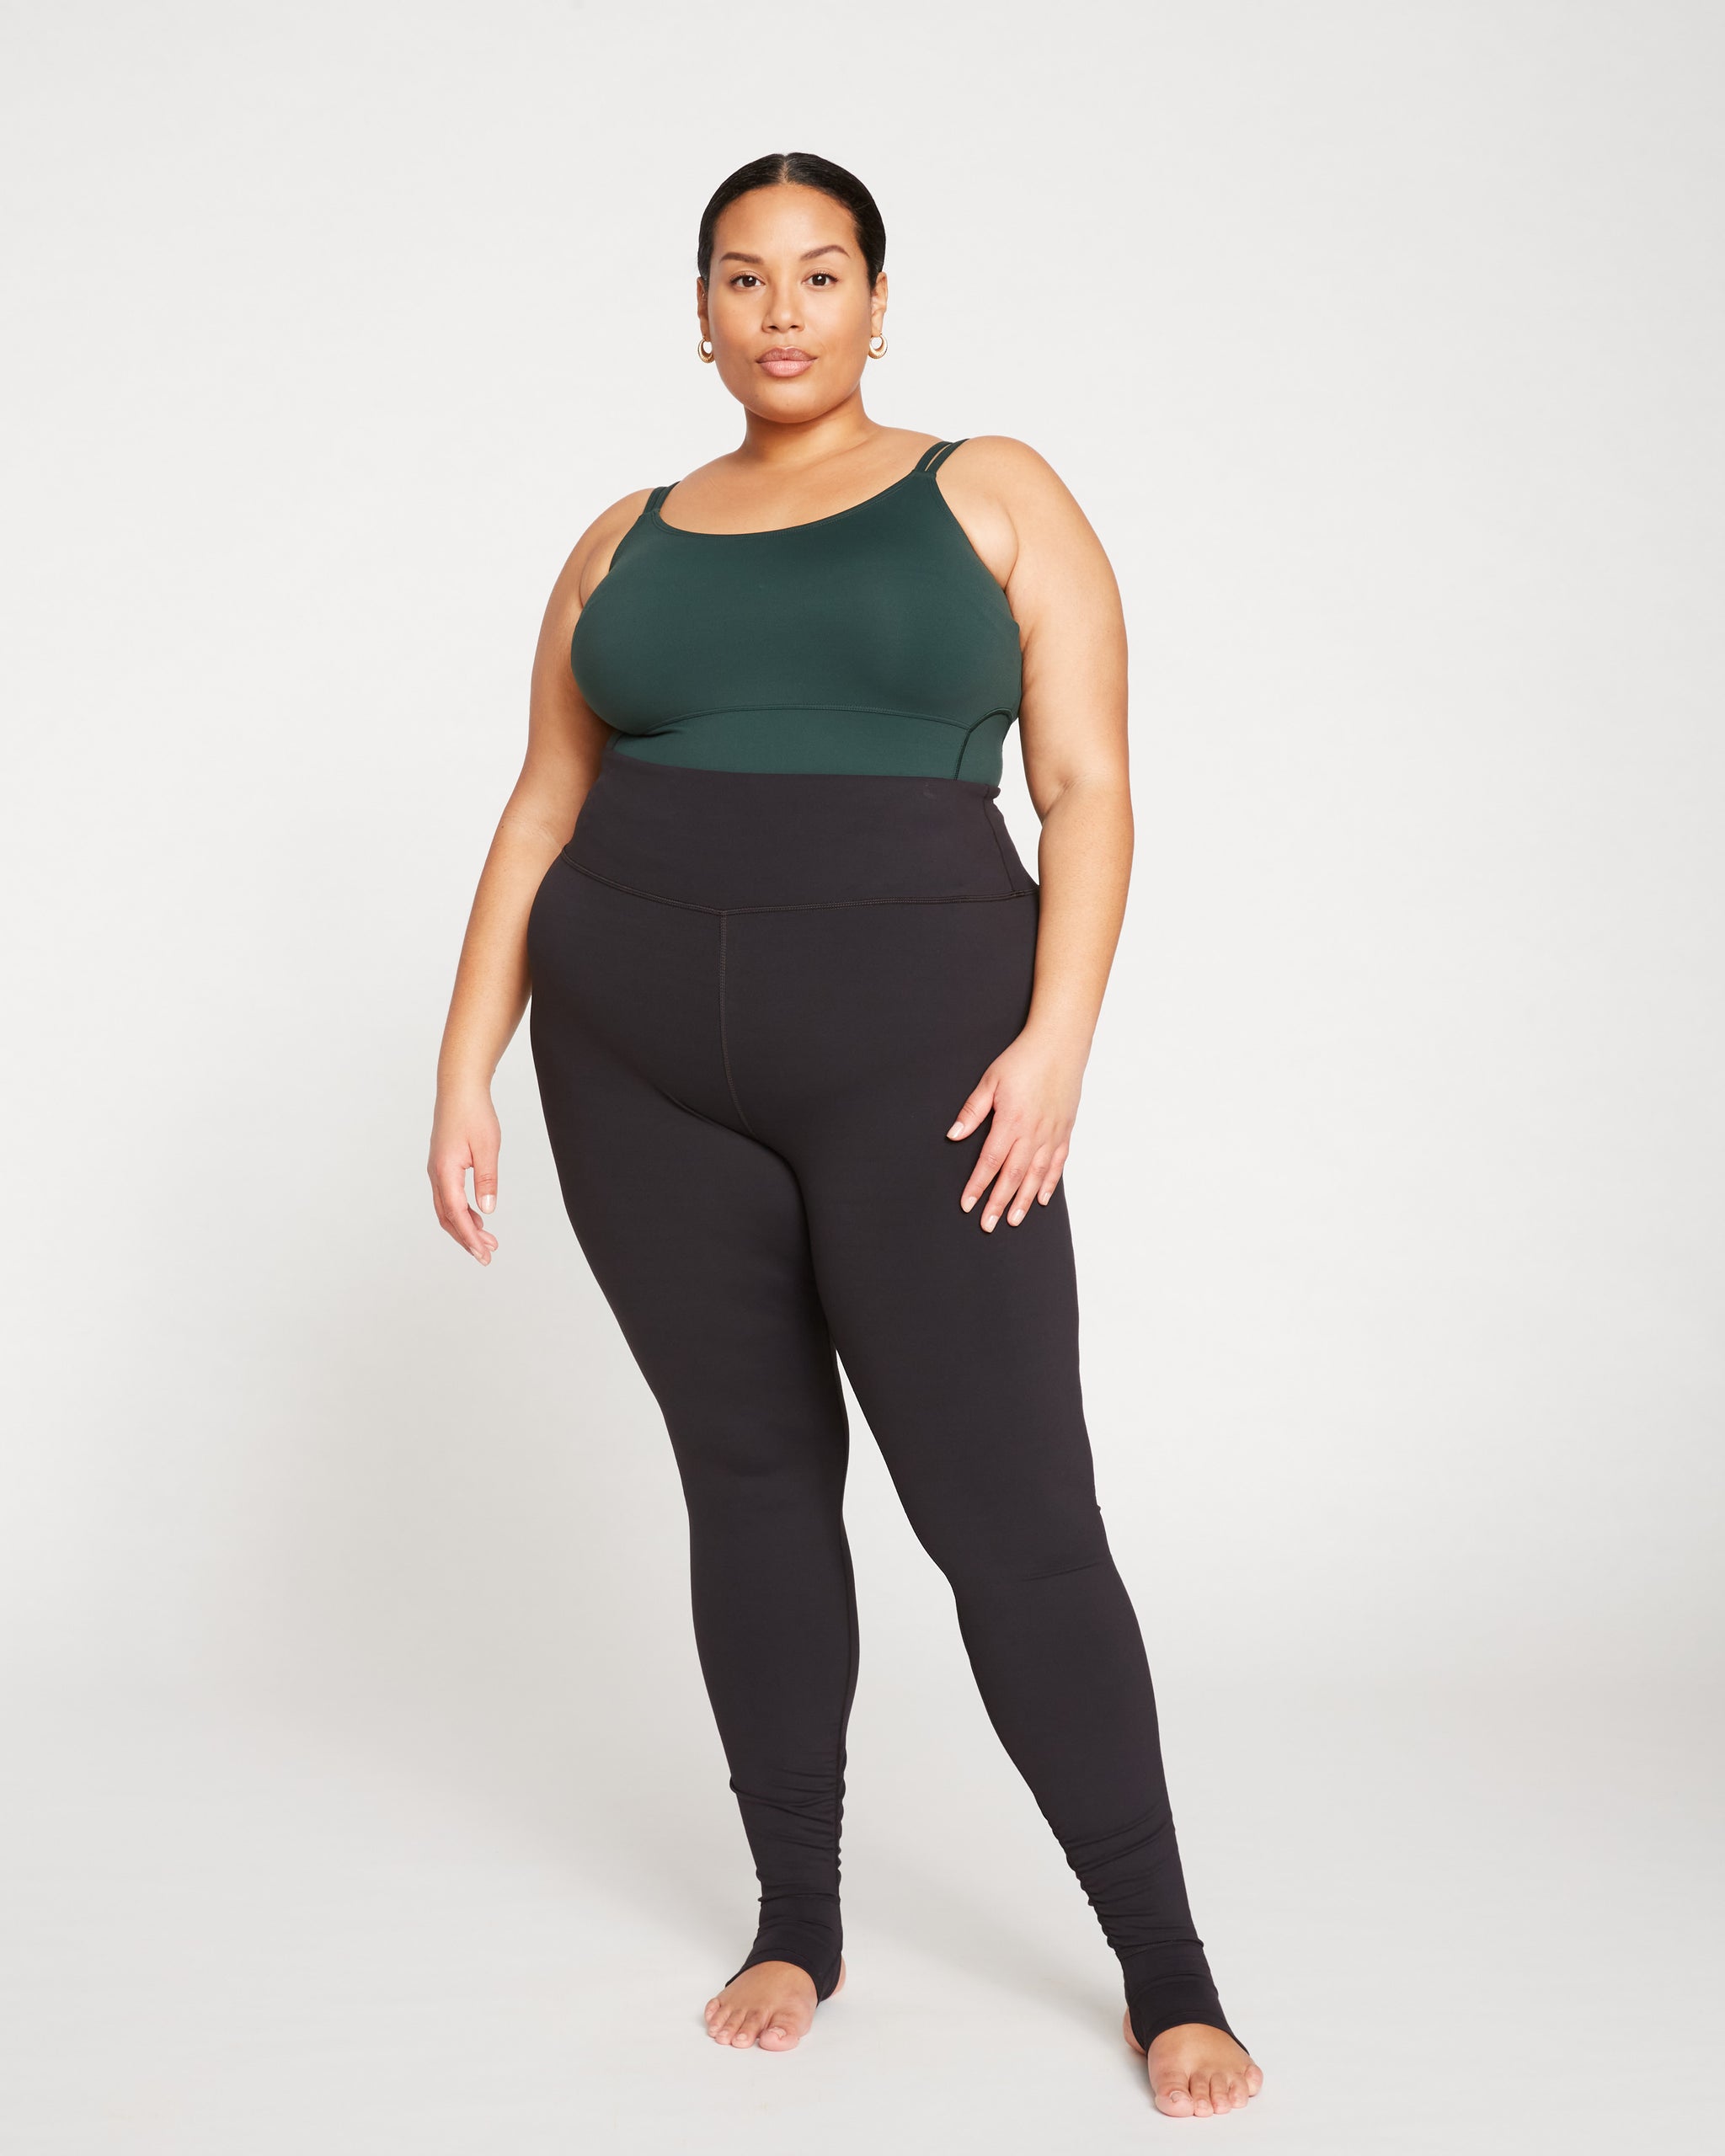 French Terry High Waisted Compression Plus Size Leggings